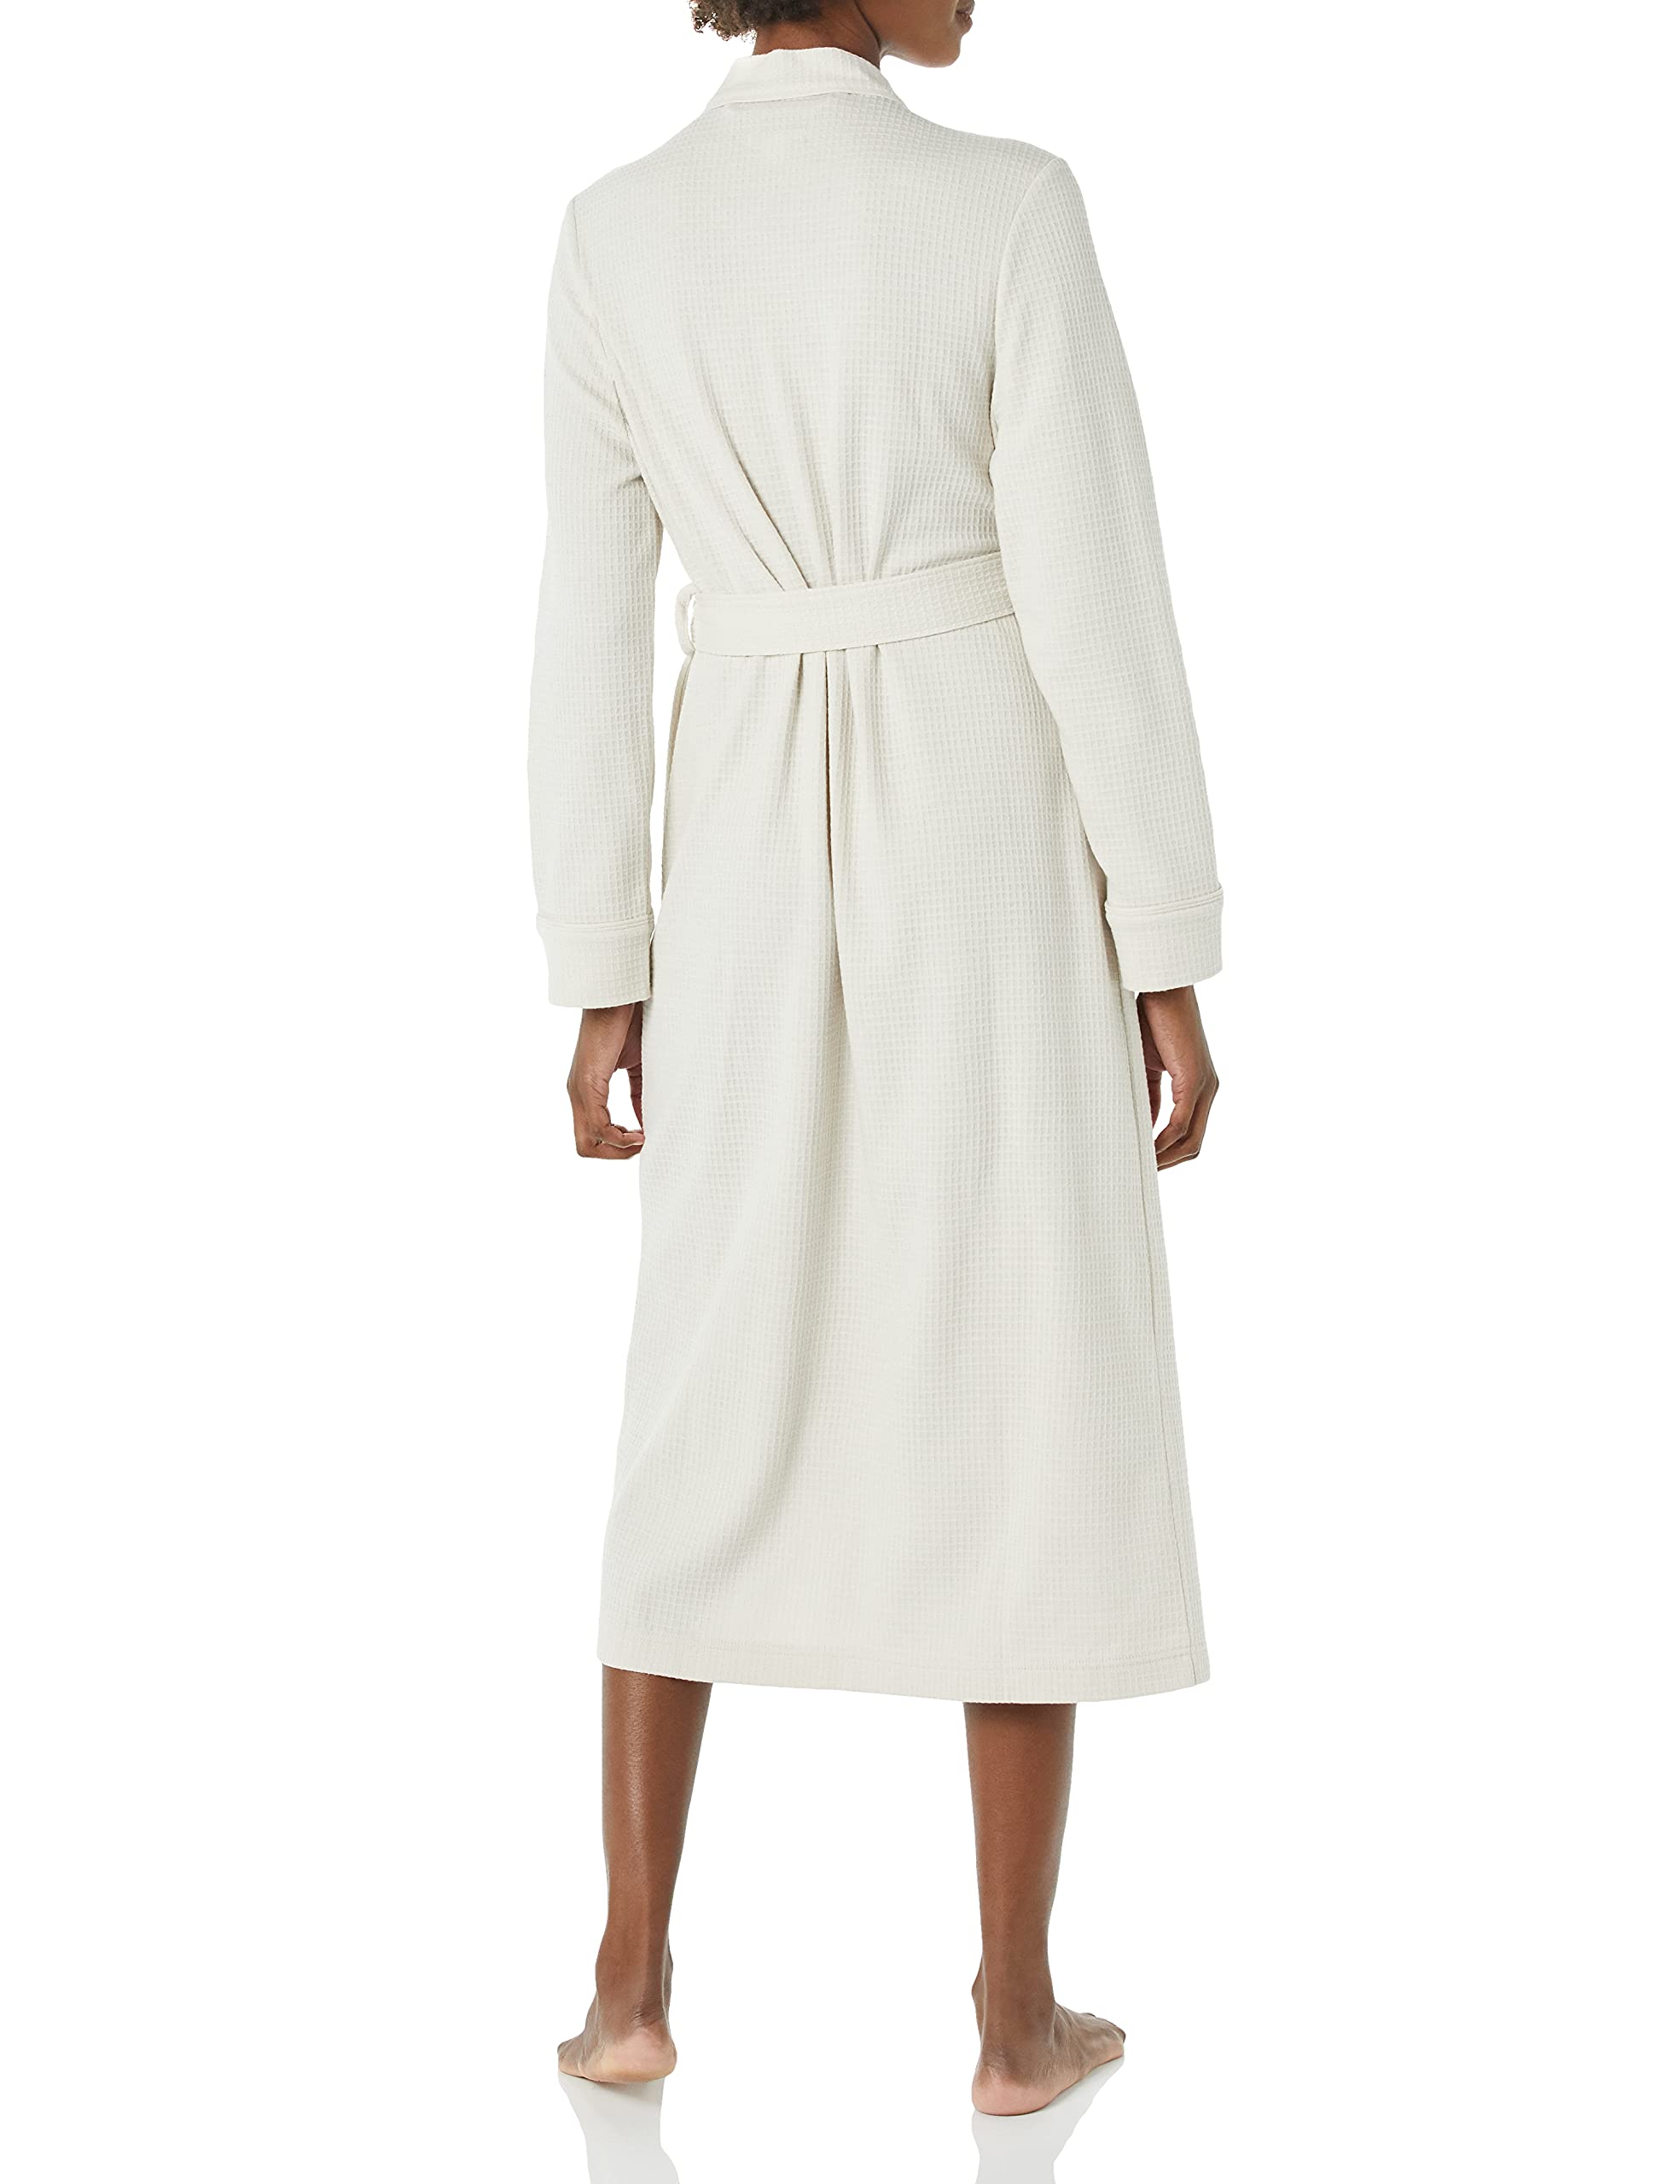 Amazon Essentials Women's Lightweight Waffle Full-Length Robe (Available in Plus Size)